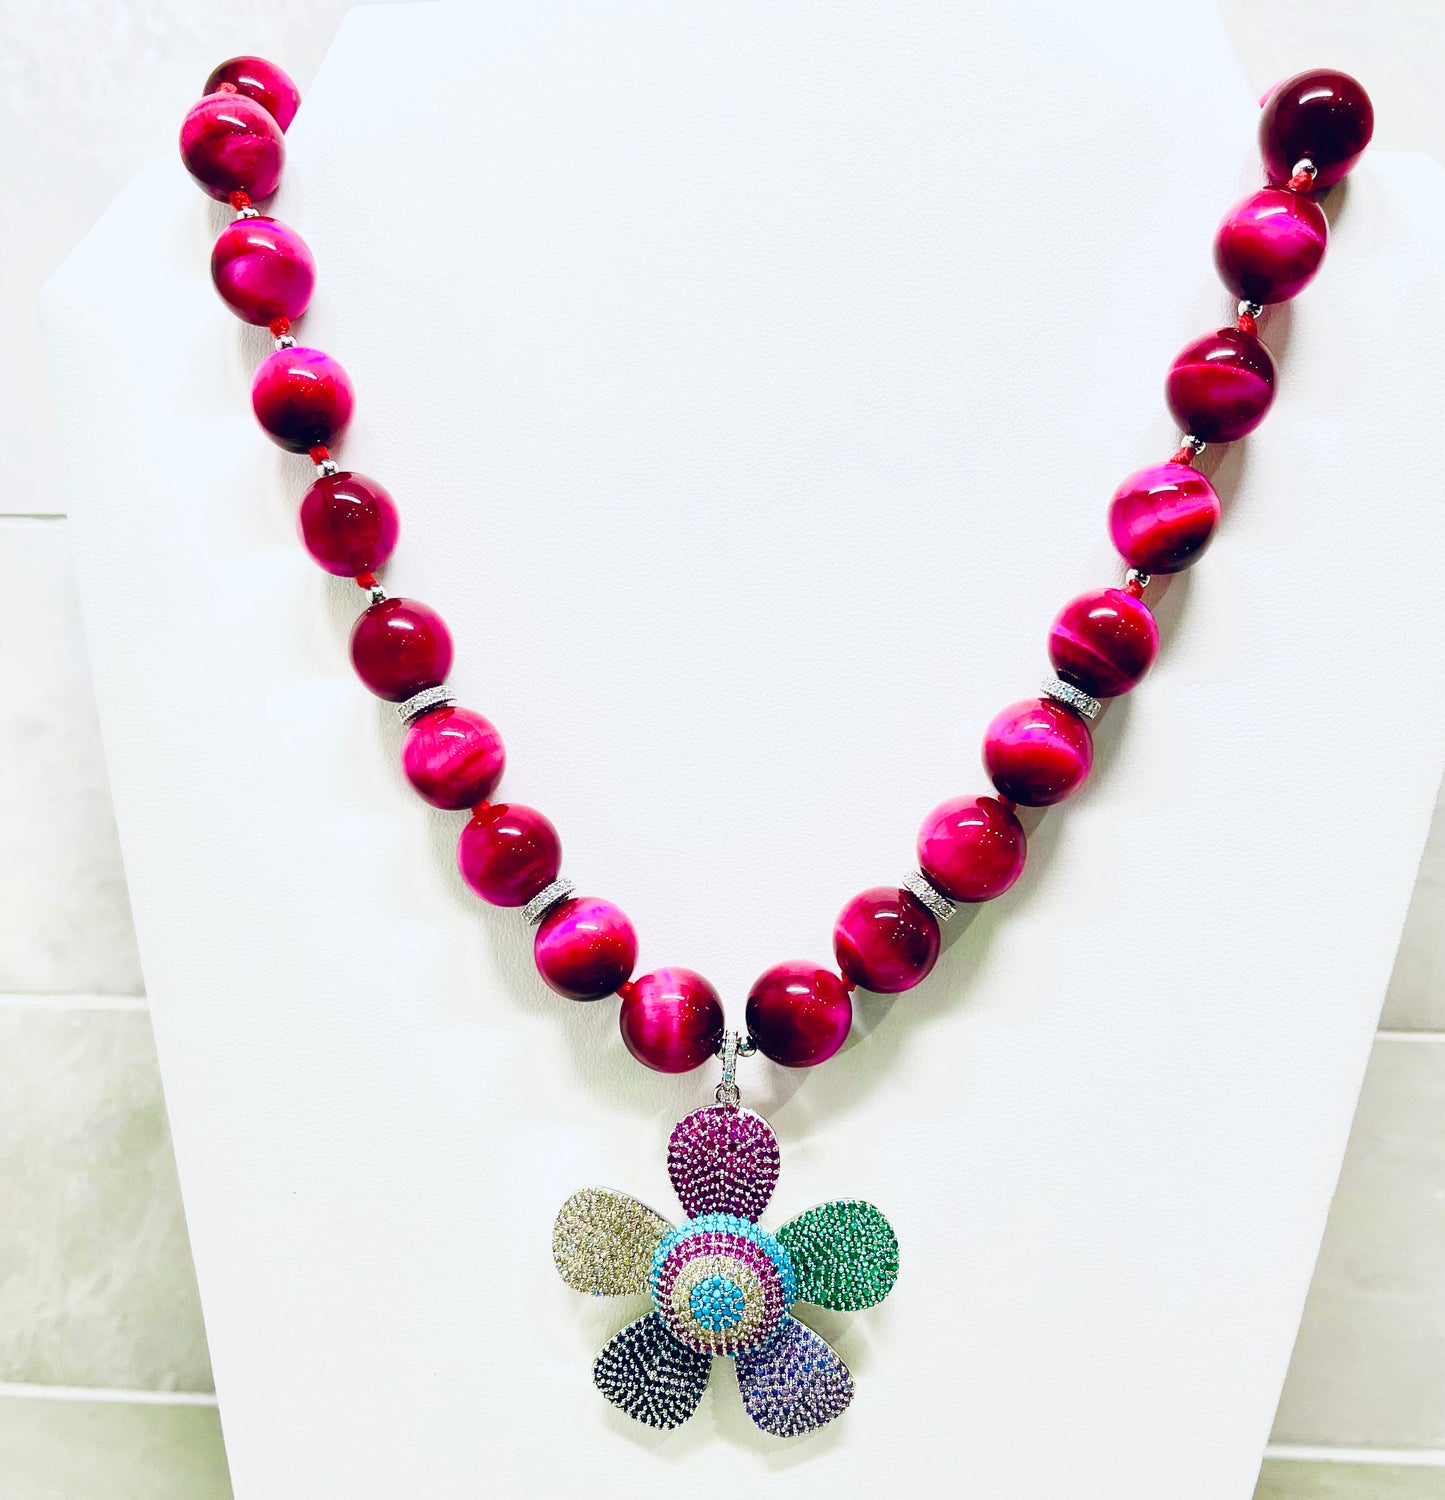 Vivid Fuchsia Tiger’s Eye & Colorful Pave Flower Pendant Statement Necklace 24”